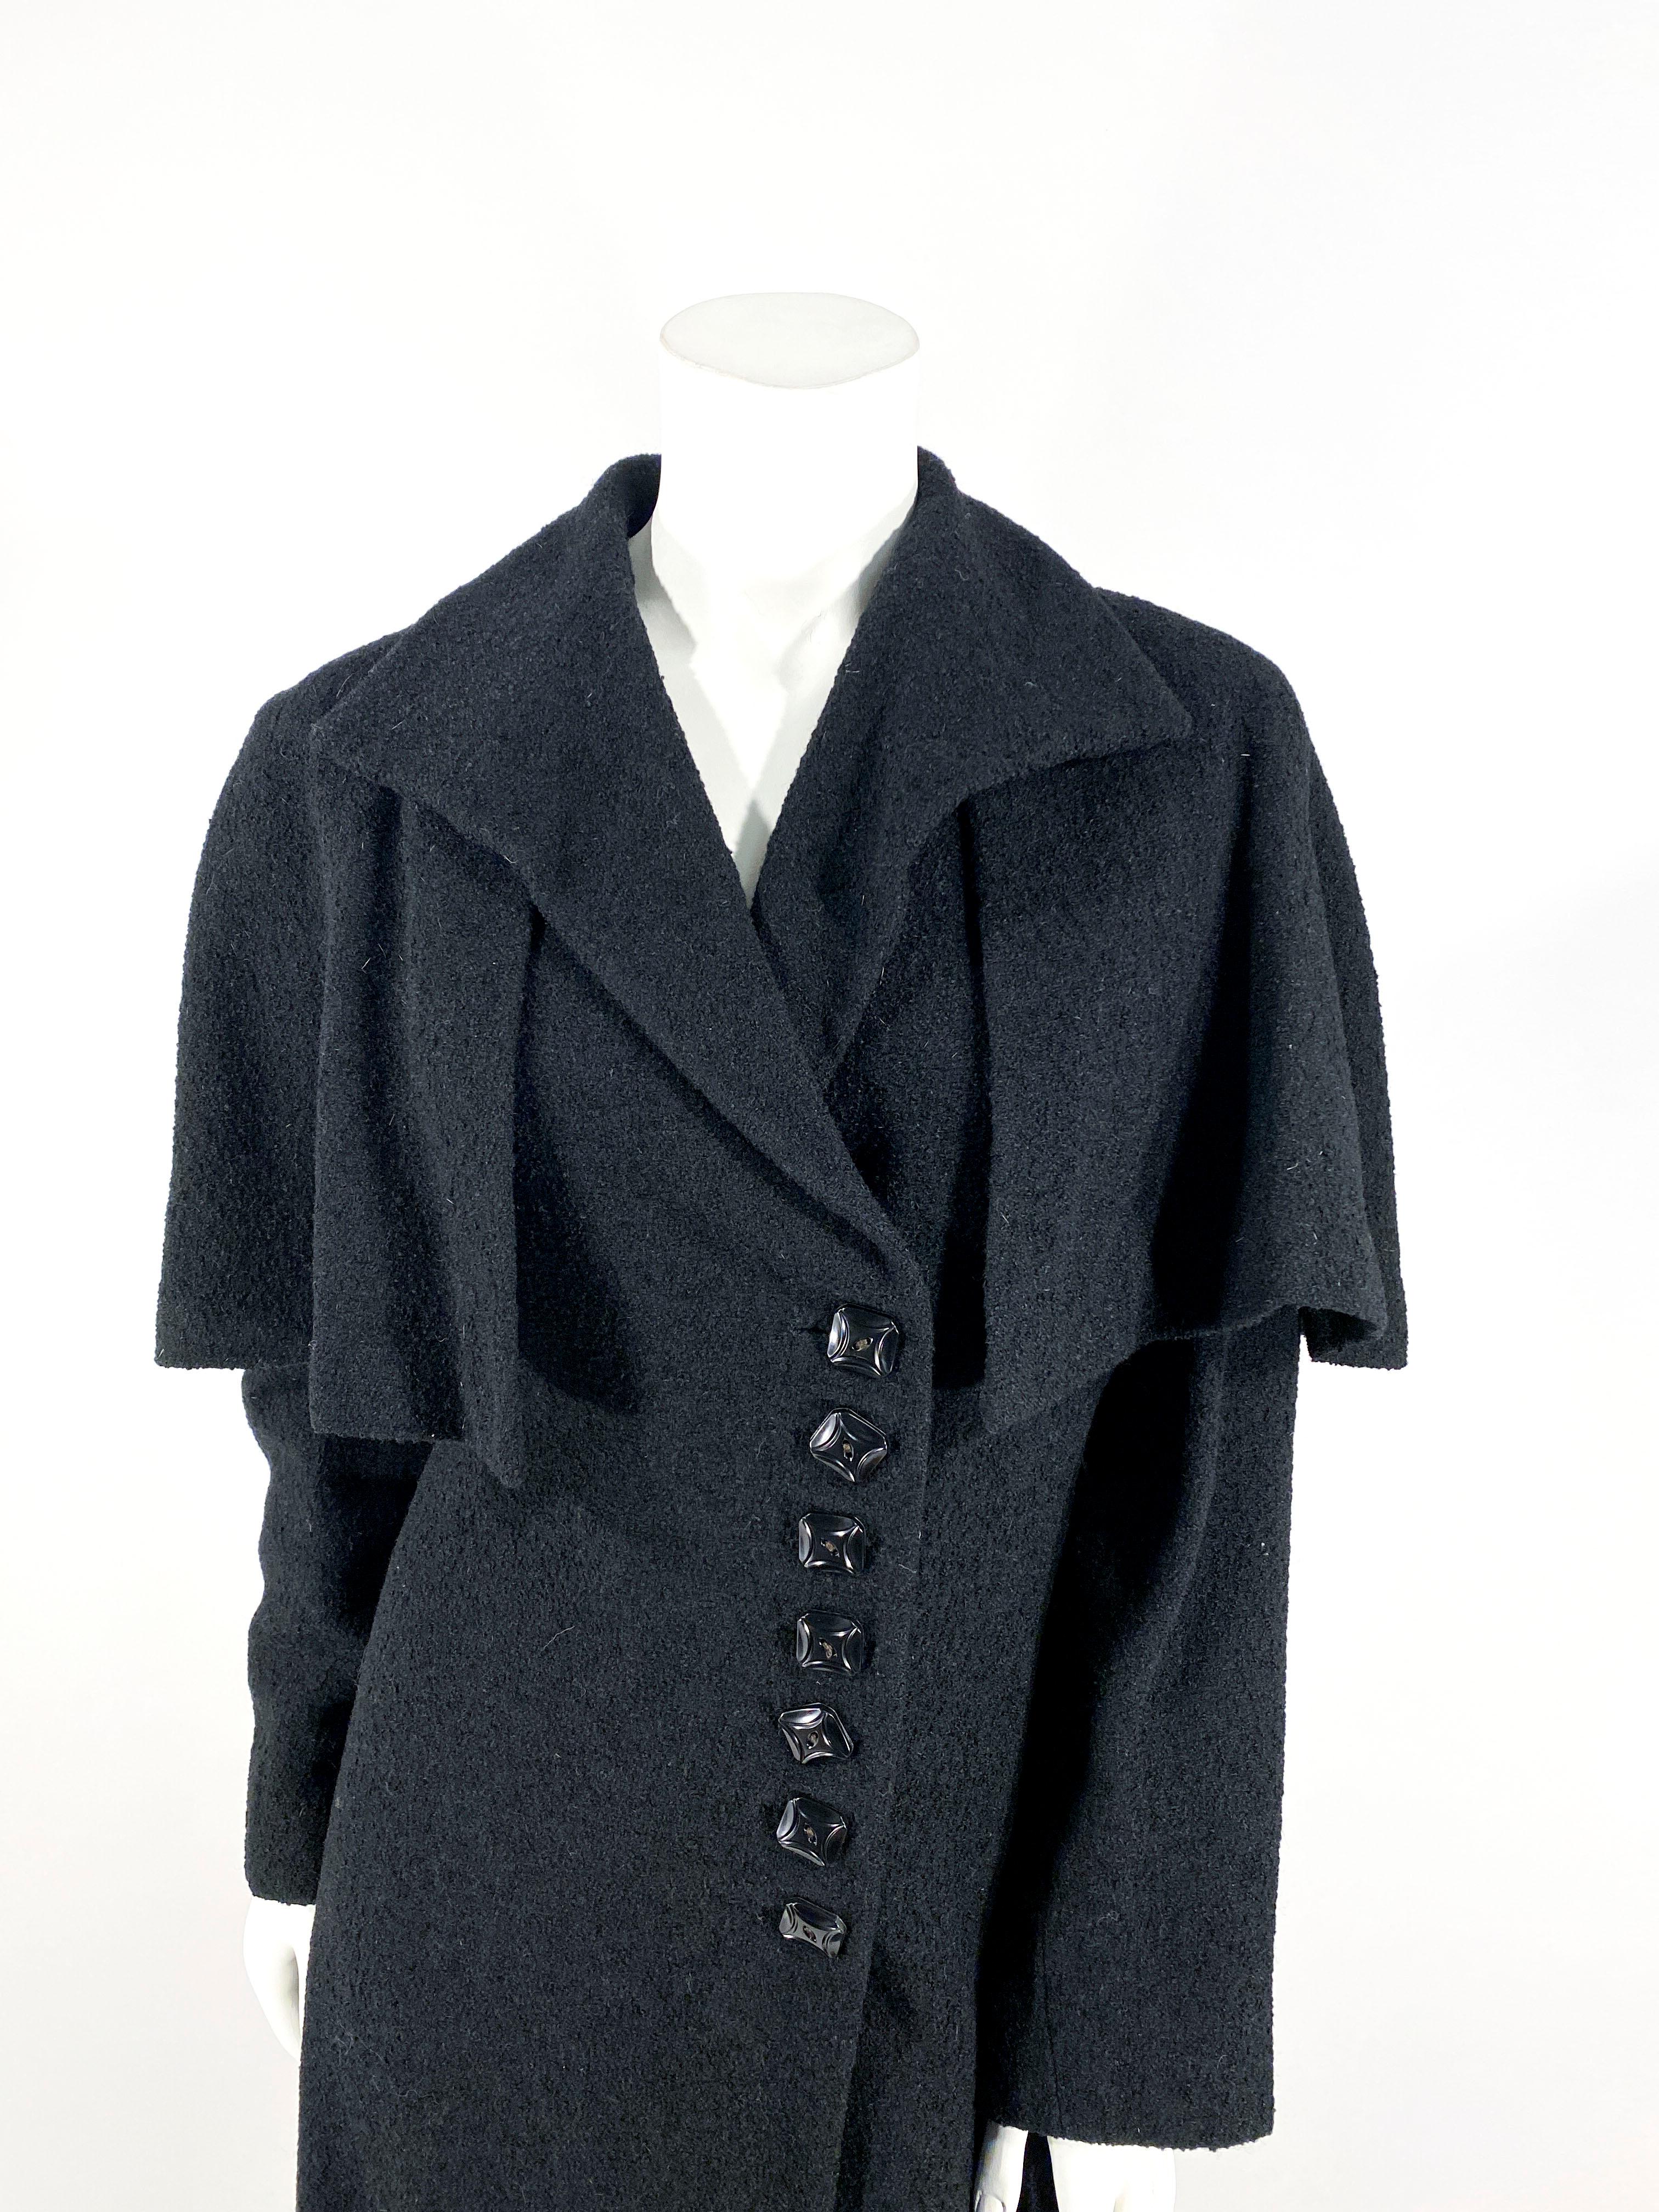 1930s black wool coat featuring an A-line silhouette, full length sleeves, a sting-ray collar and an attached capelet. The front closure has a series of black art deco buttons that match the rows of buttons on the back of each sleeve. The coat is